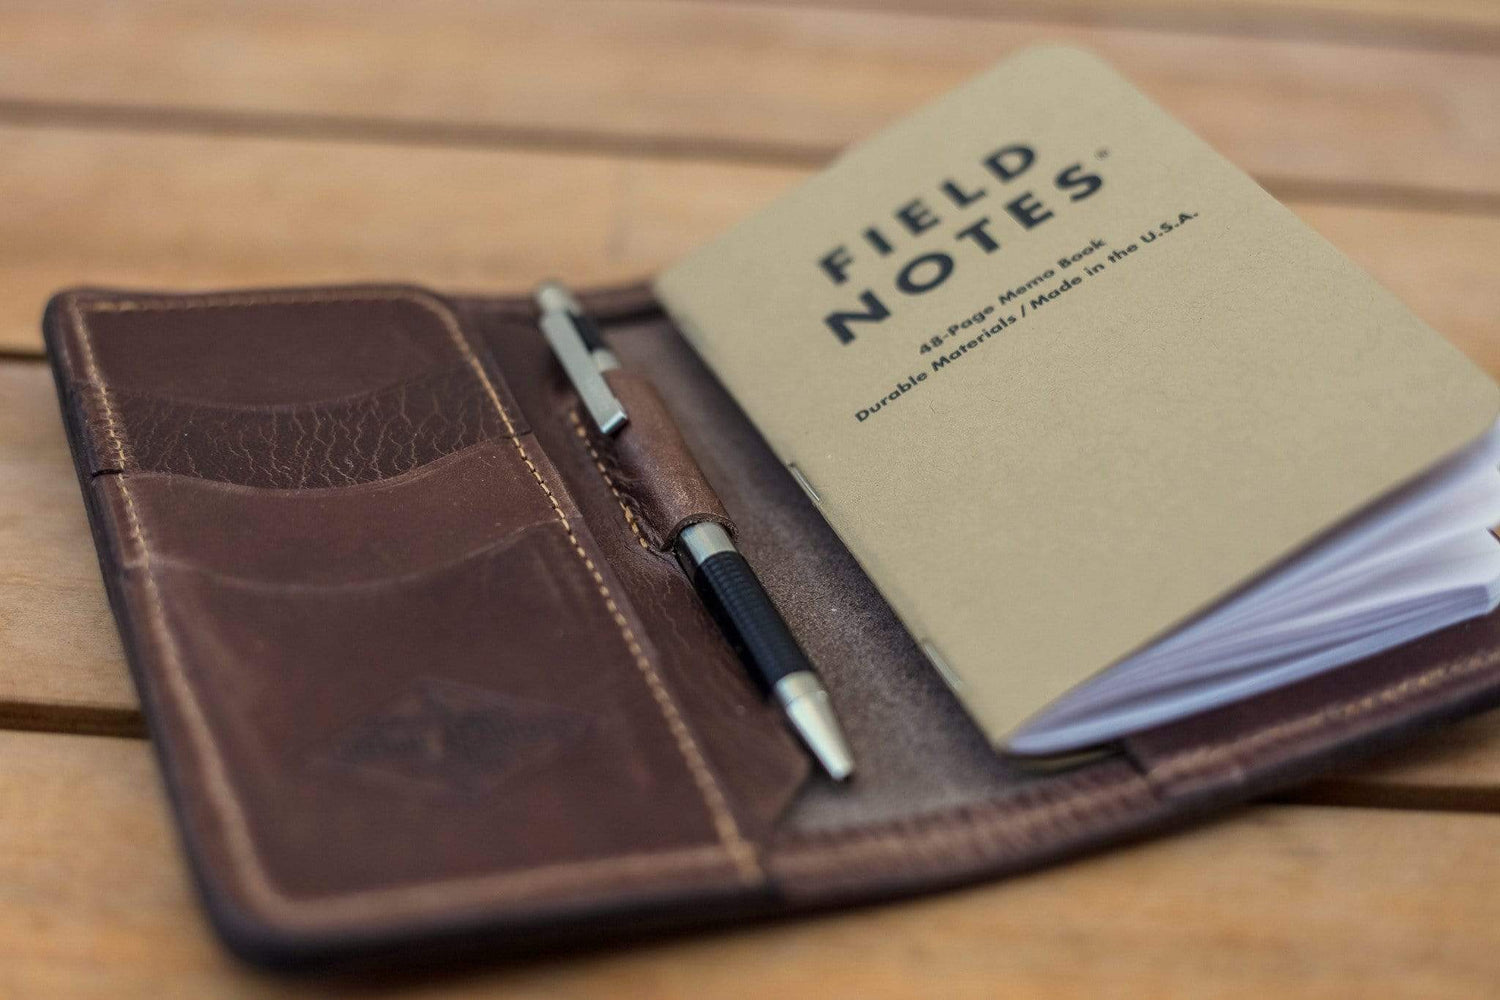 Custom Leather Field Notes